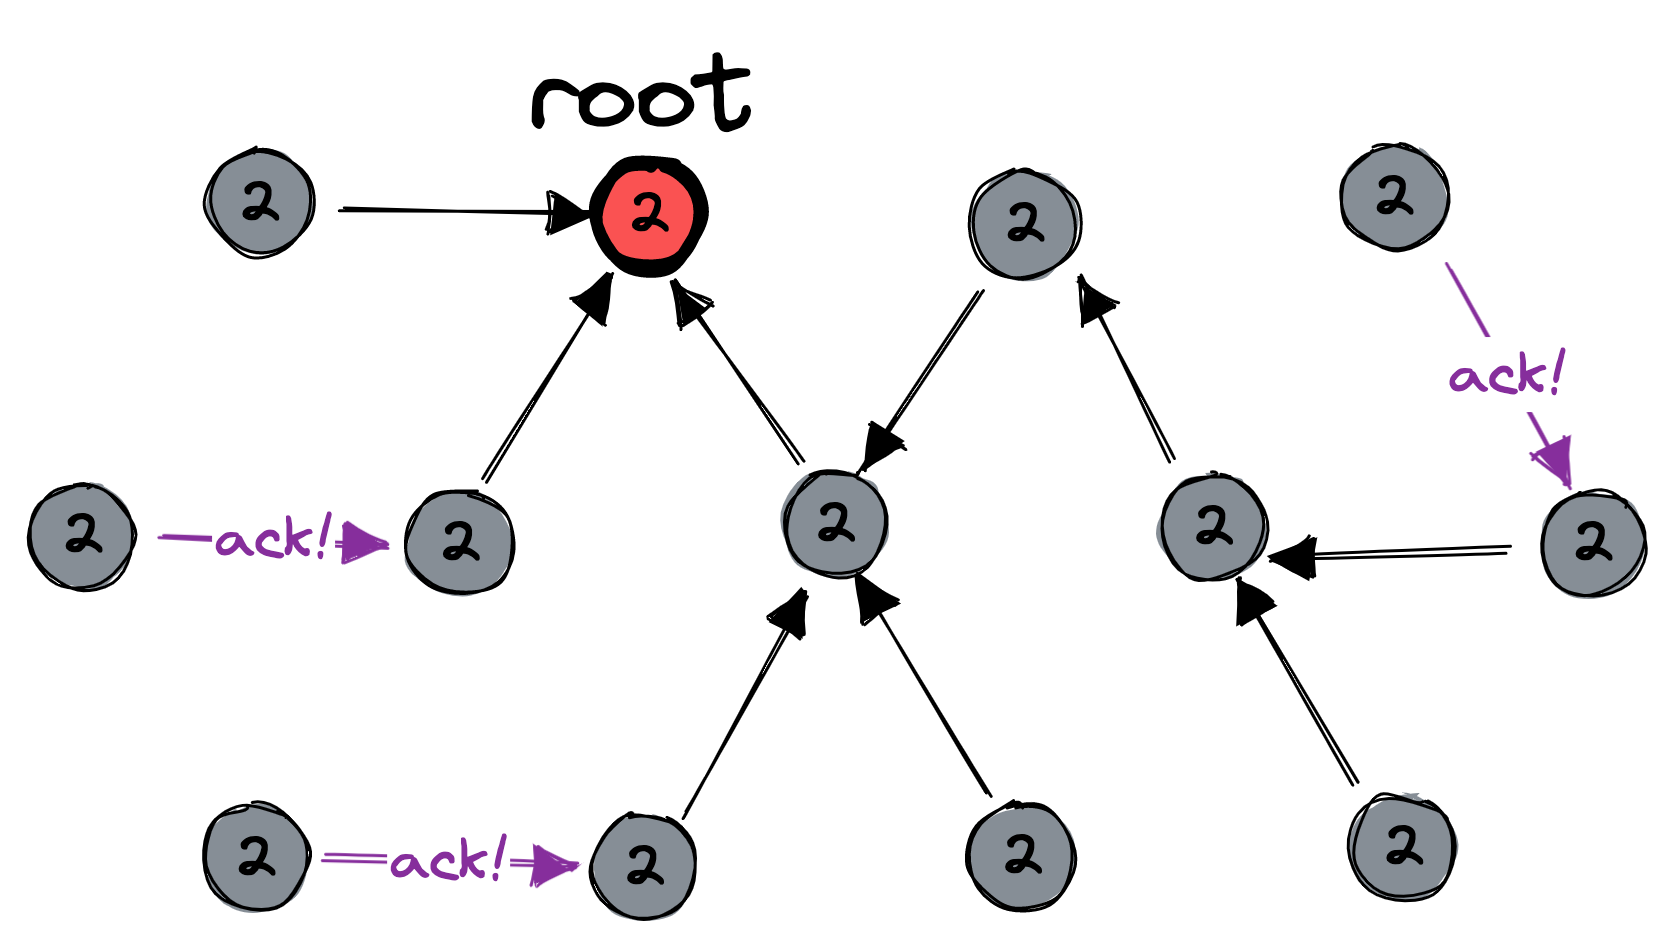 All nodes are now labeled “two”. Some leaf nodes are saying “ack” to their parents.